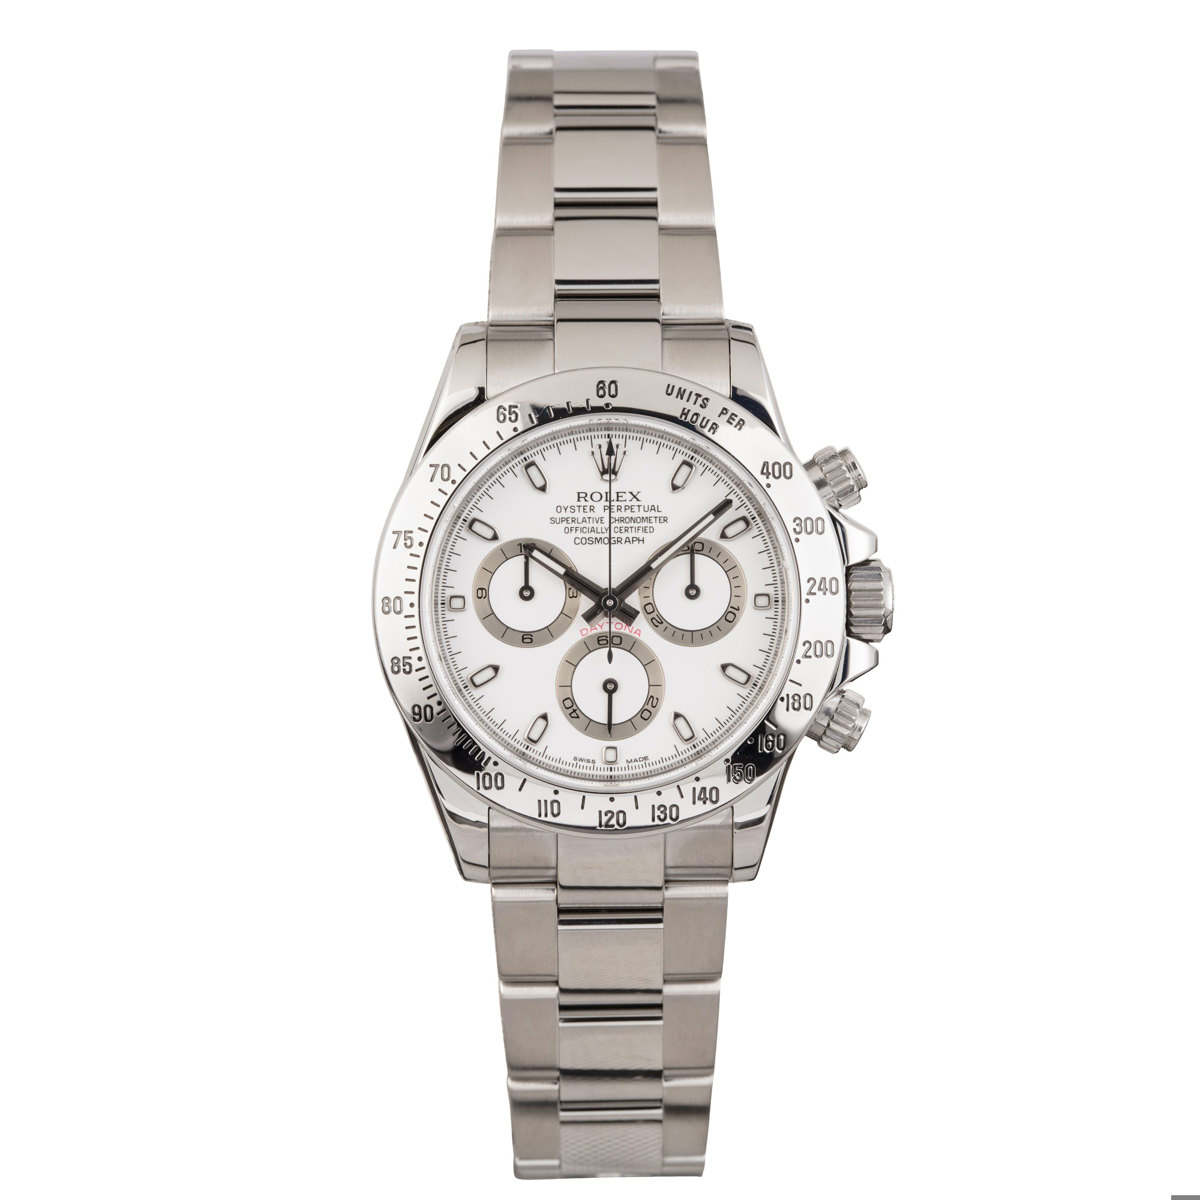 Rolex Daytona Ref 116520 A Stainless Steel Chronograph Wristwatch with Bracelet Circa 2011 offered by Sotheby's